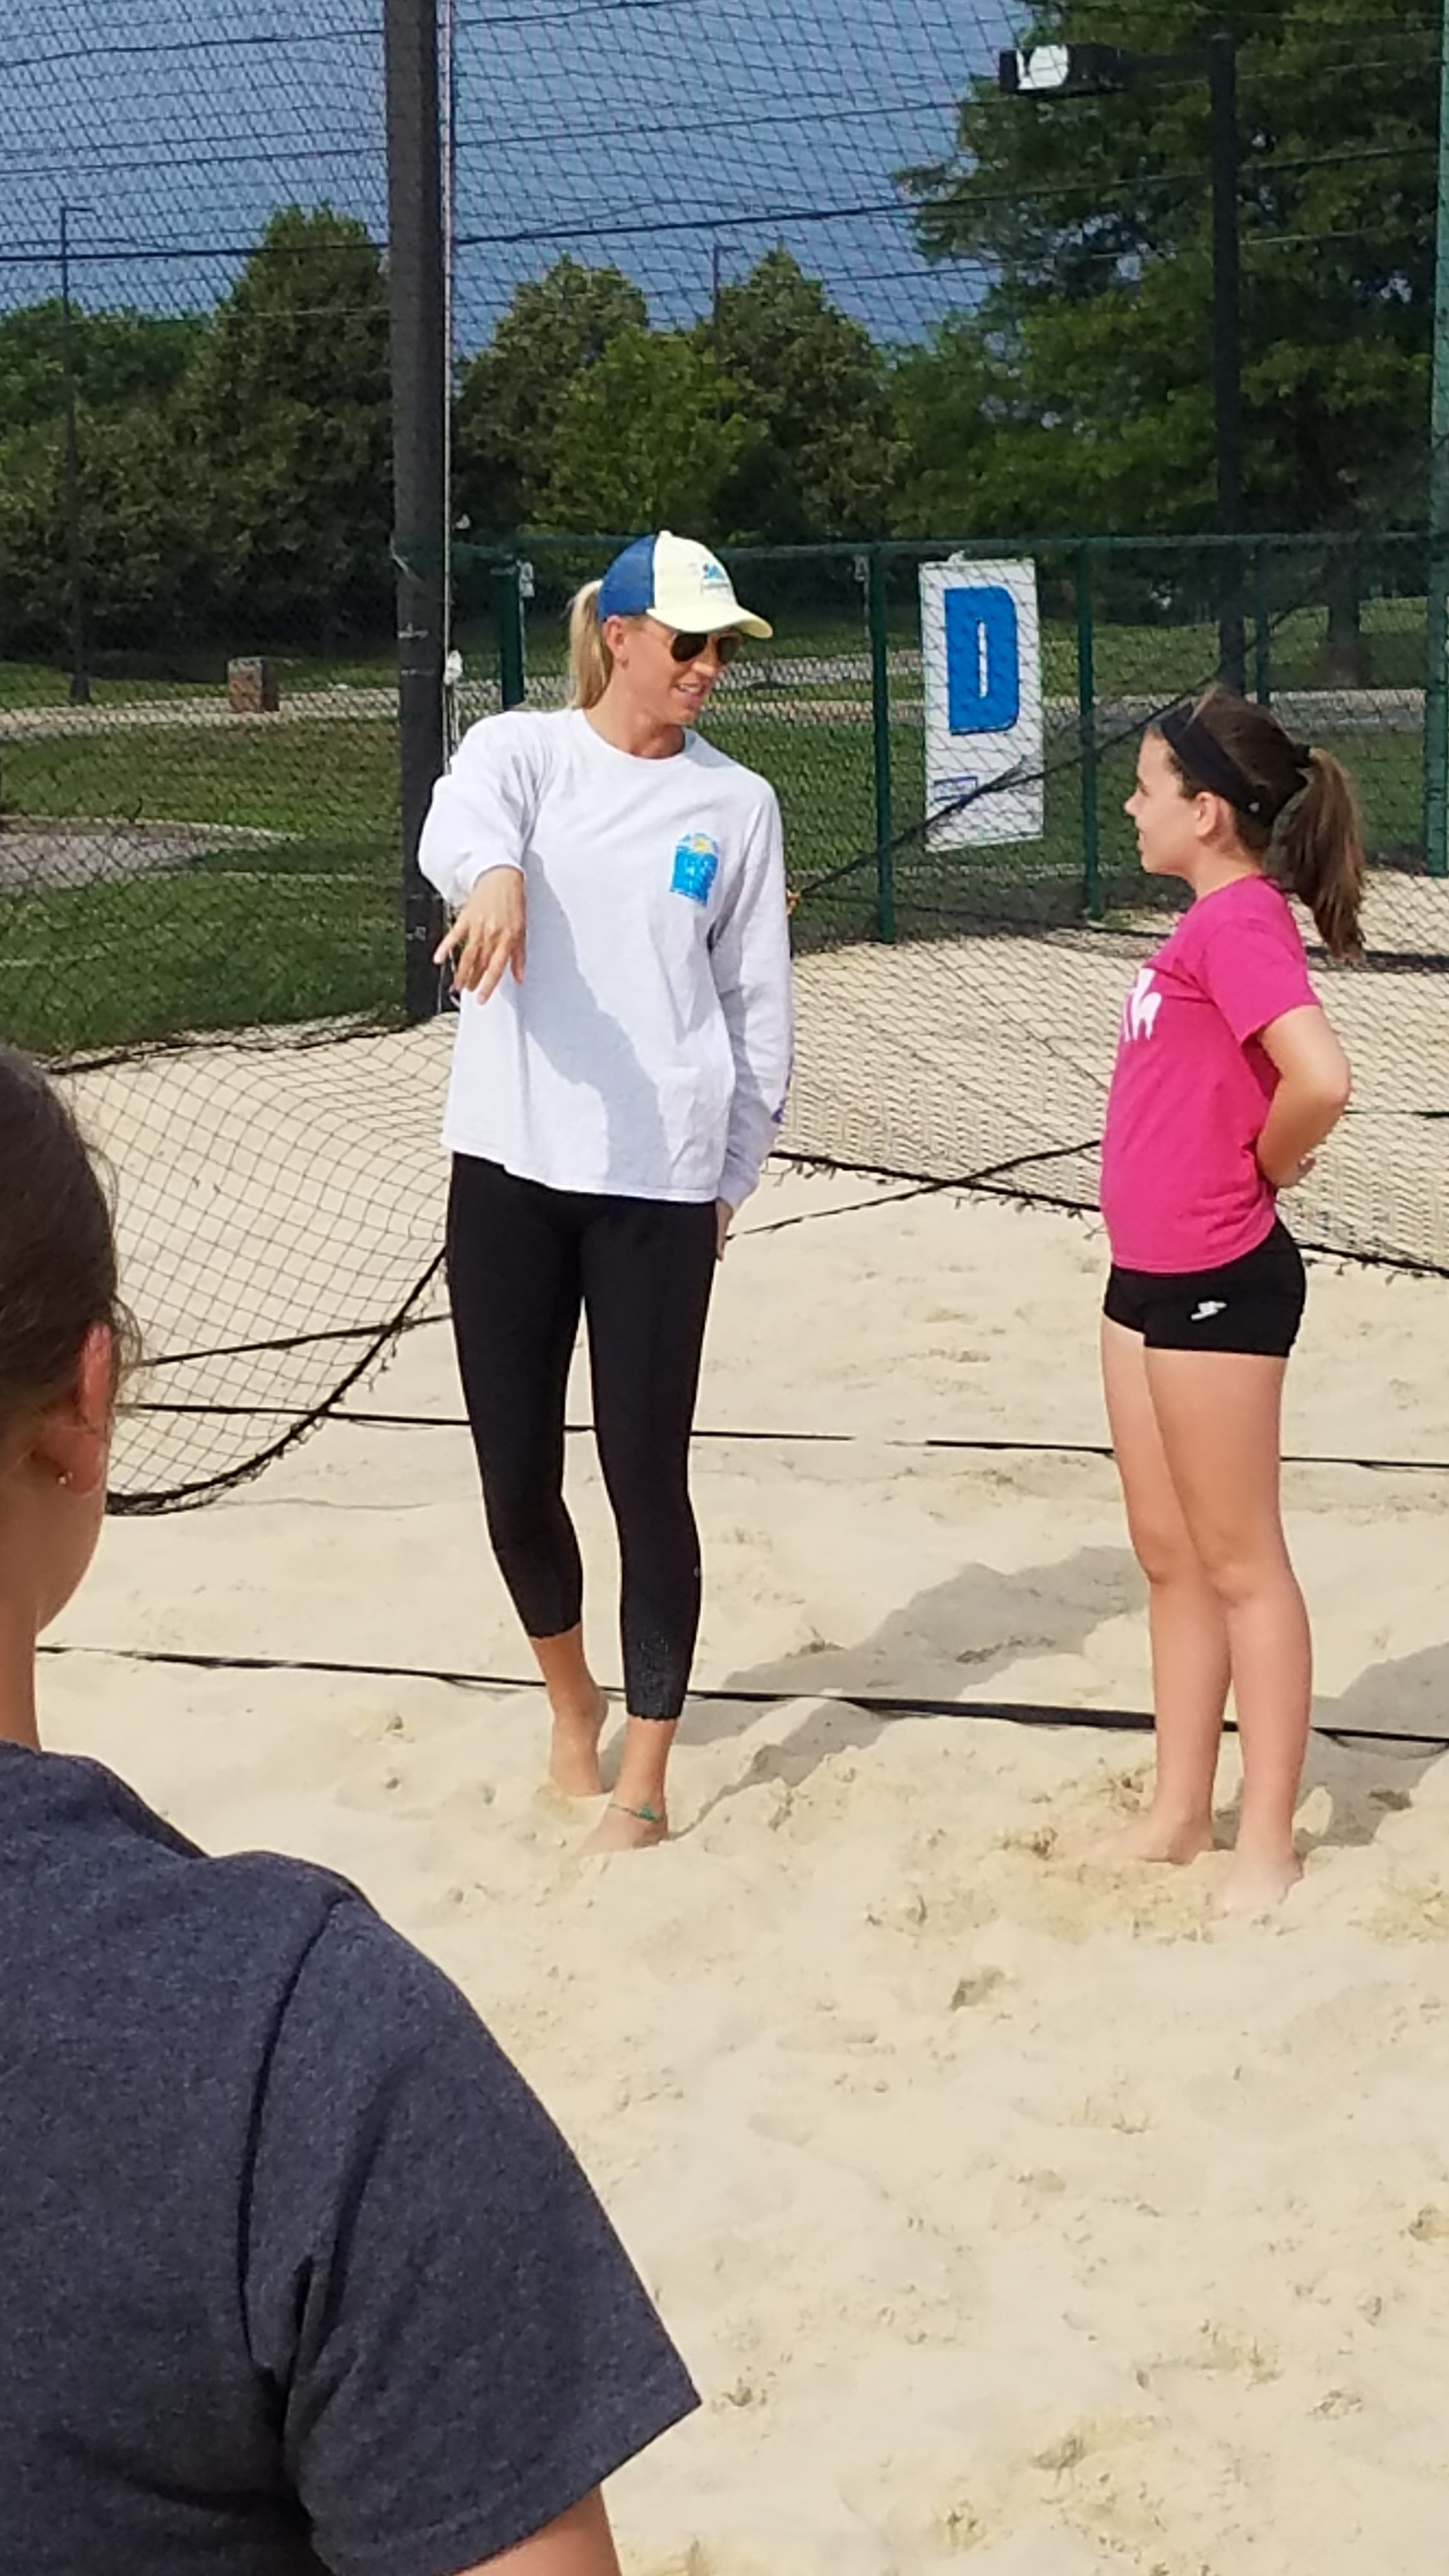 Chatting with Local NVL Pro Kaitlyn Leary in Her Hometown at #NVLMIDWEST